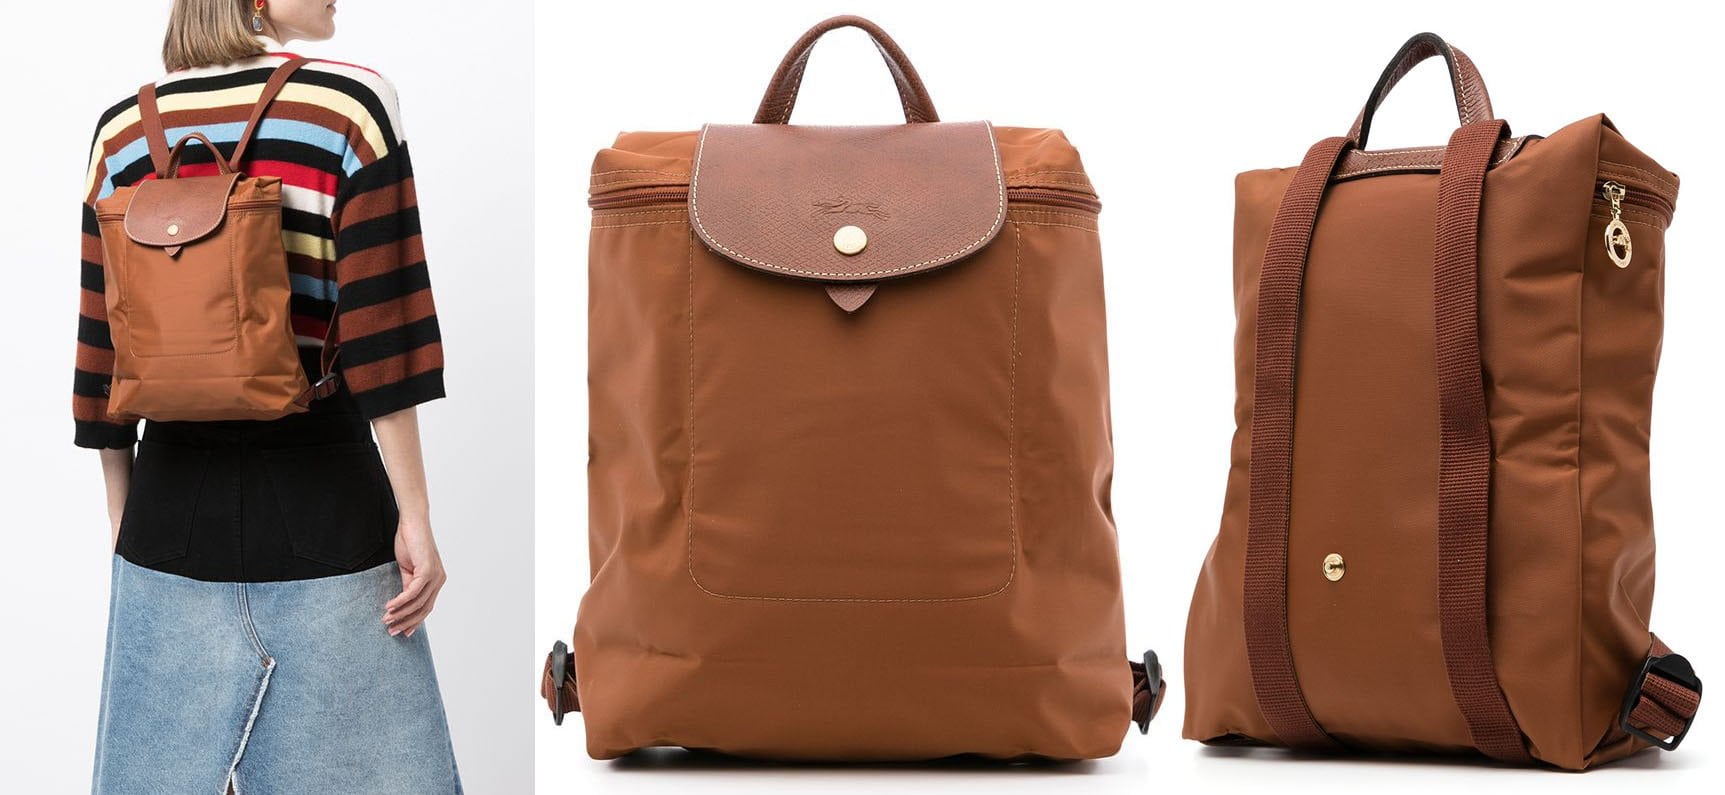 Affordable and fuss-free, Longchamp's iconic Le Pliage backpack is designed to fold easily into your suitcase while traveling